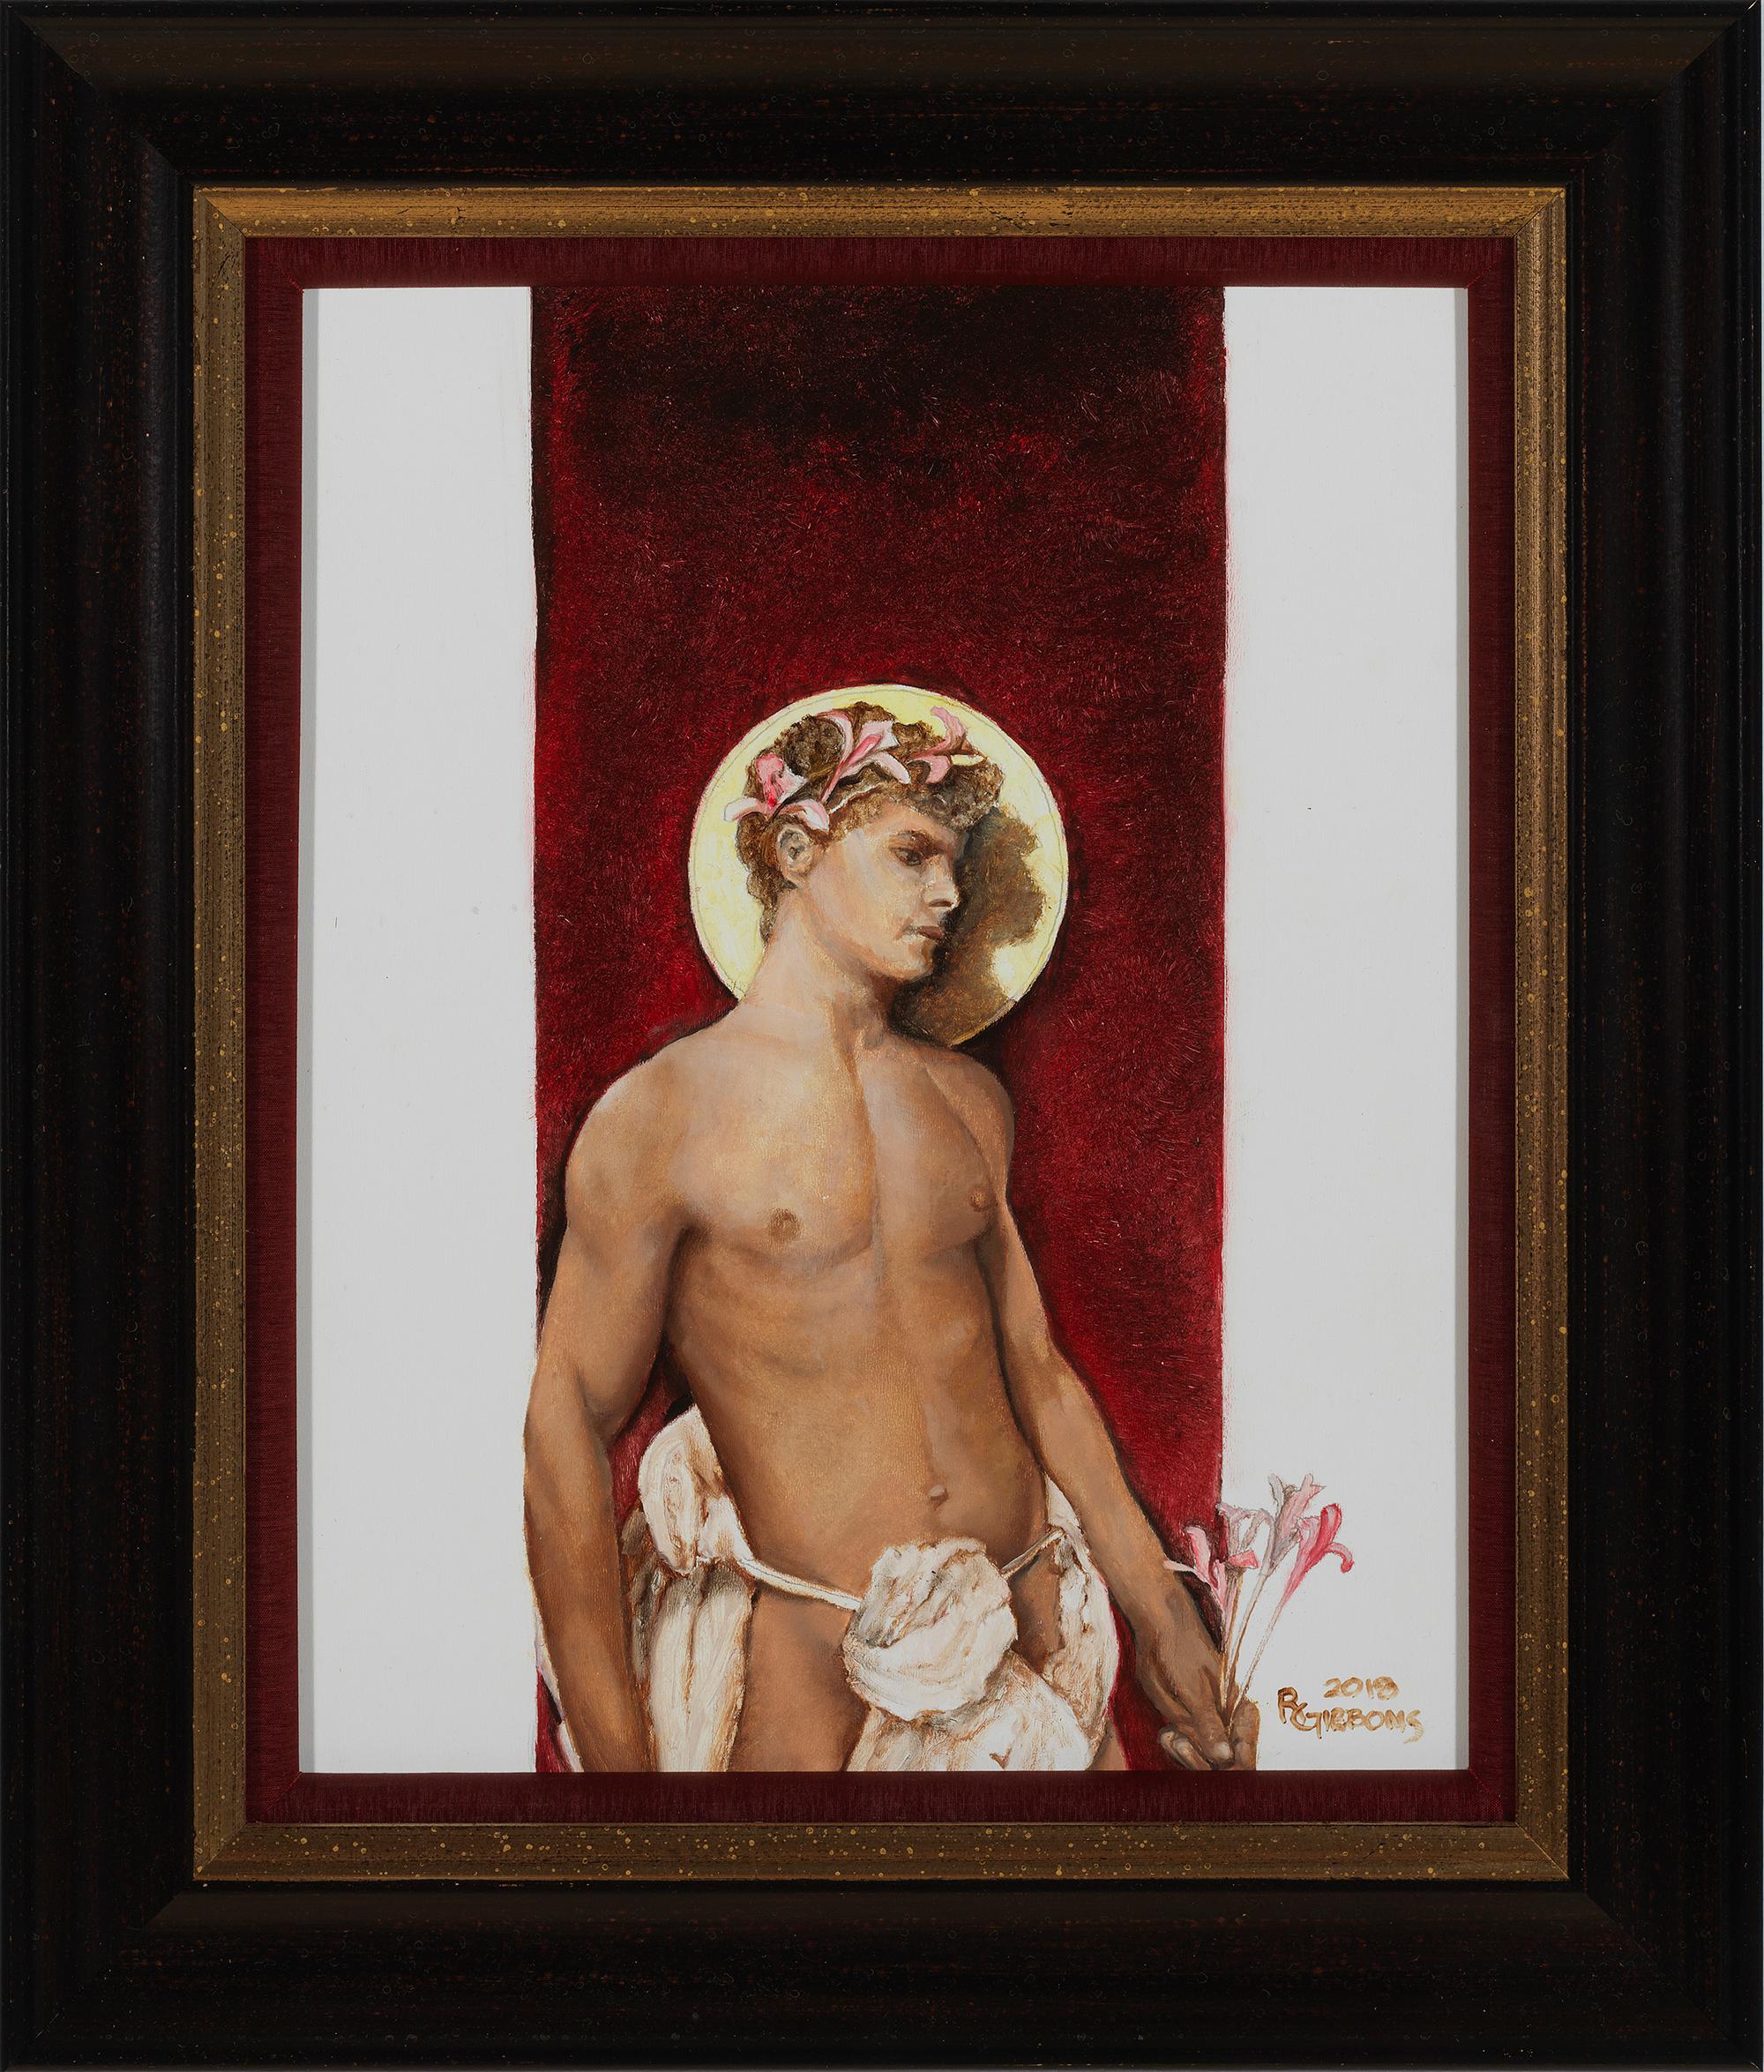 Richard Gibbons Nude Painting – Saint - Young, Semi-Nude Male with Burgundy and White Background, Oil on Panel